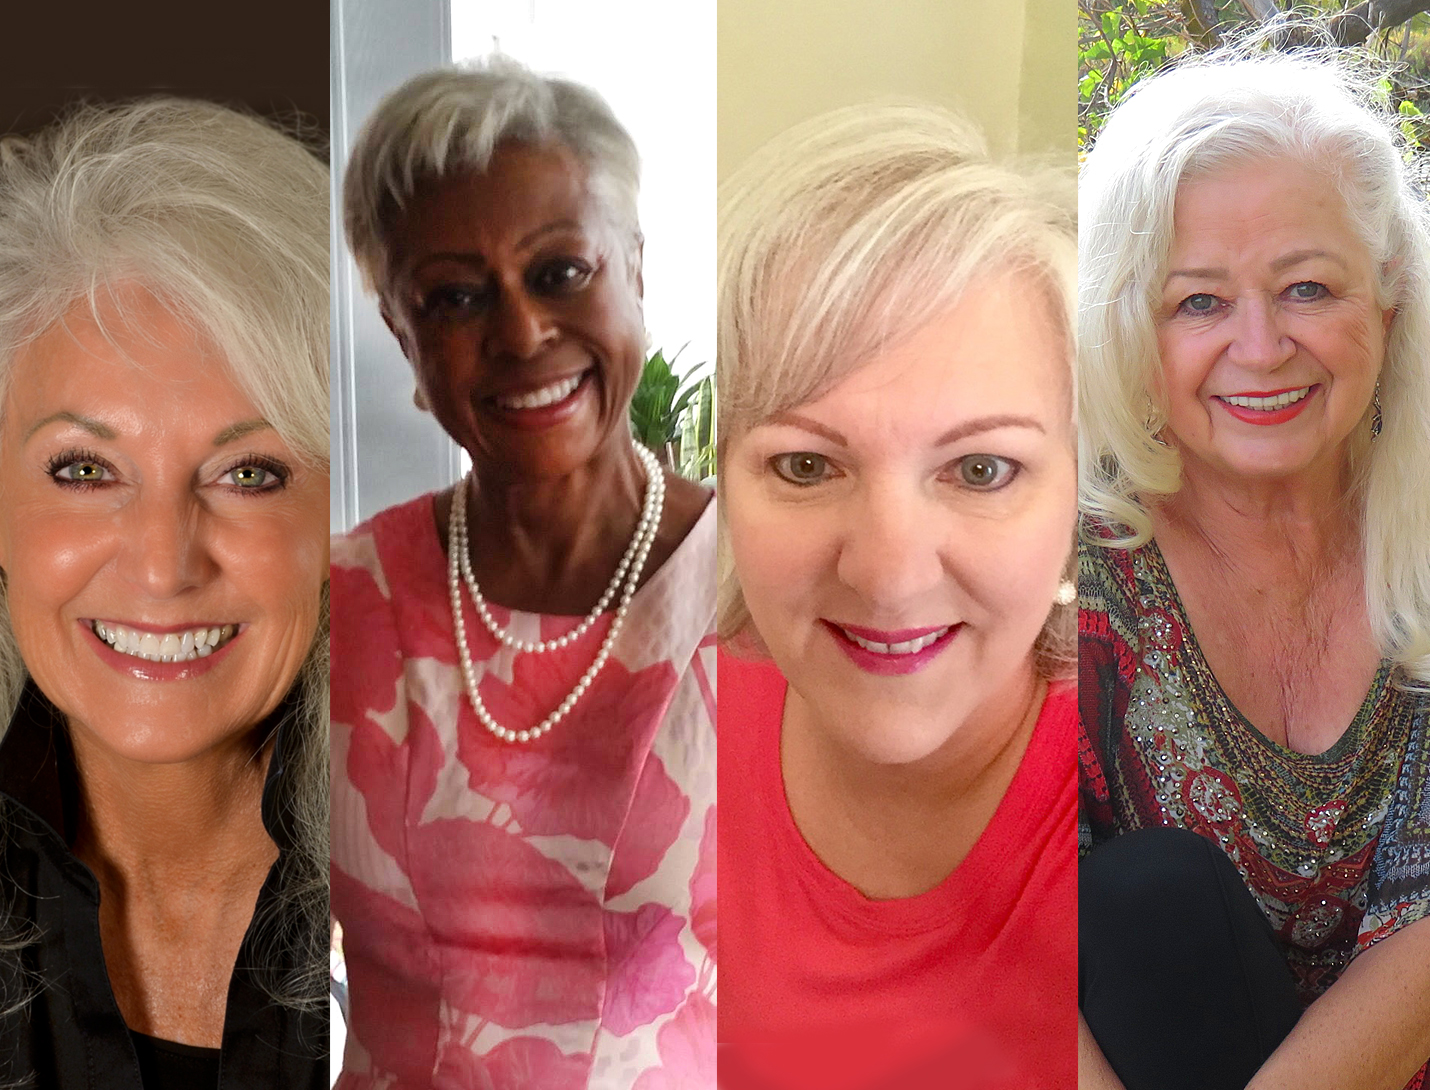 6 Women Share their Experiences Going Gray